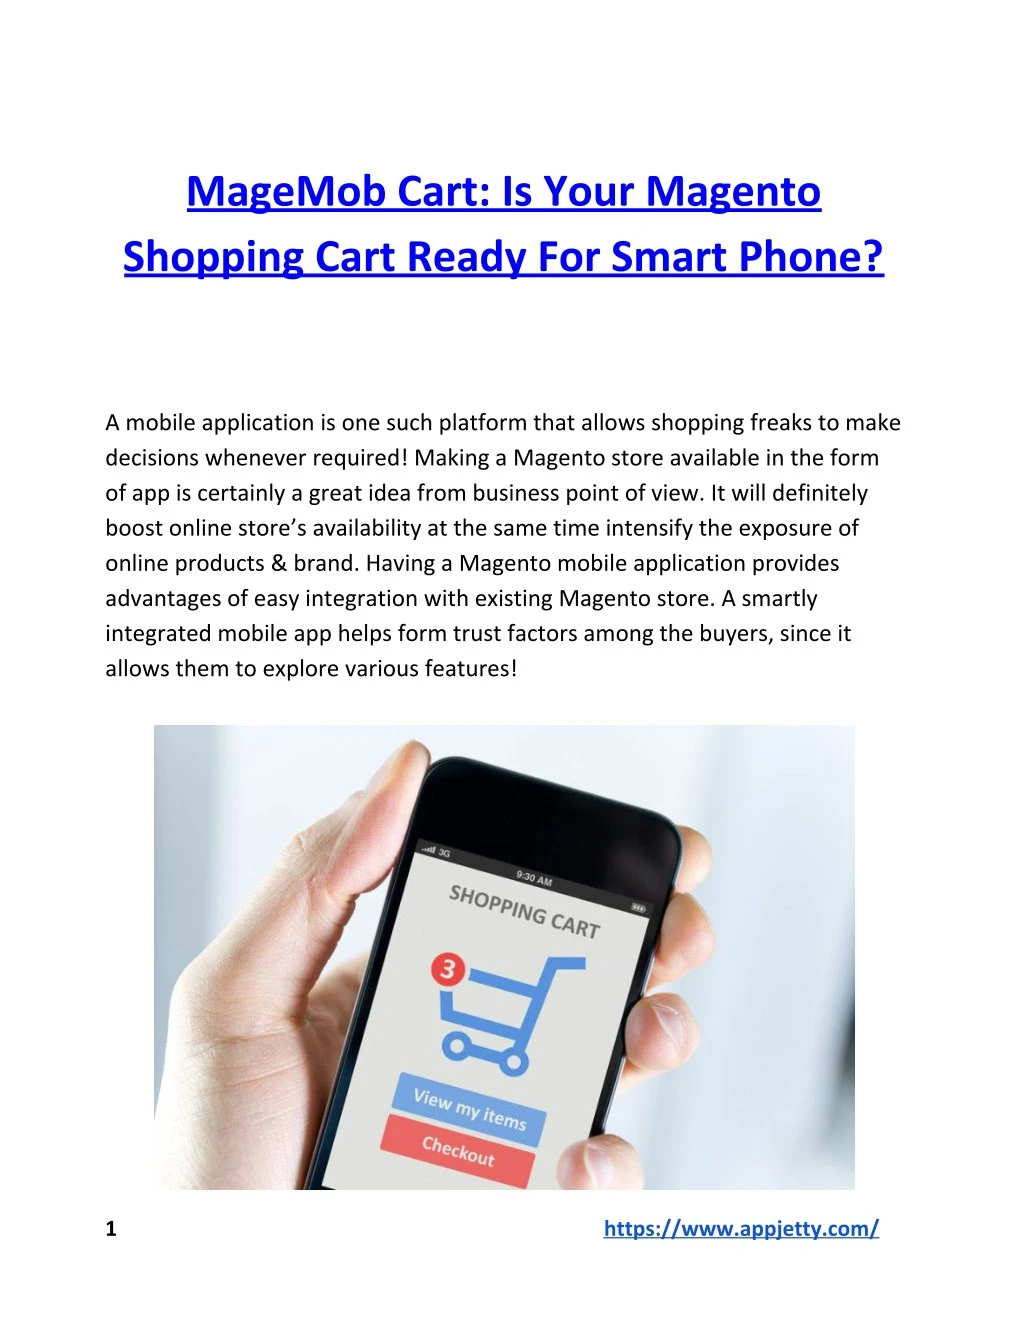 magemob cart is your magento shopping cart ready